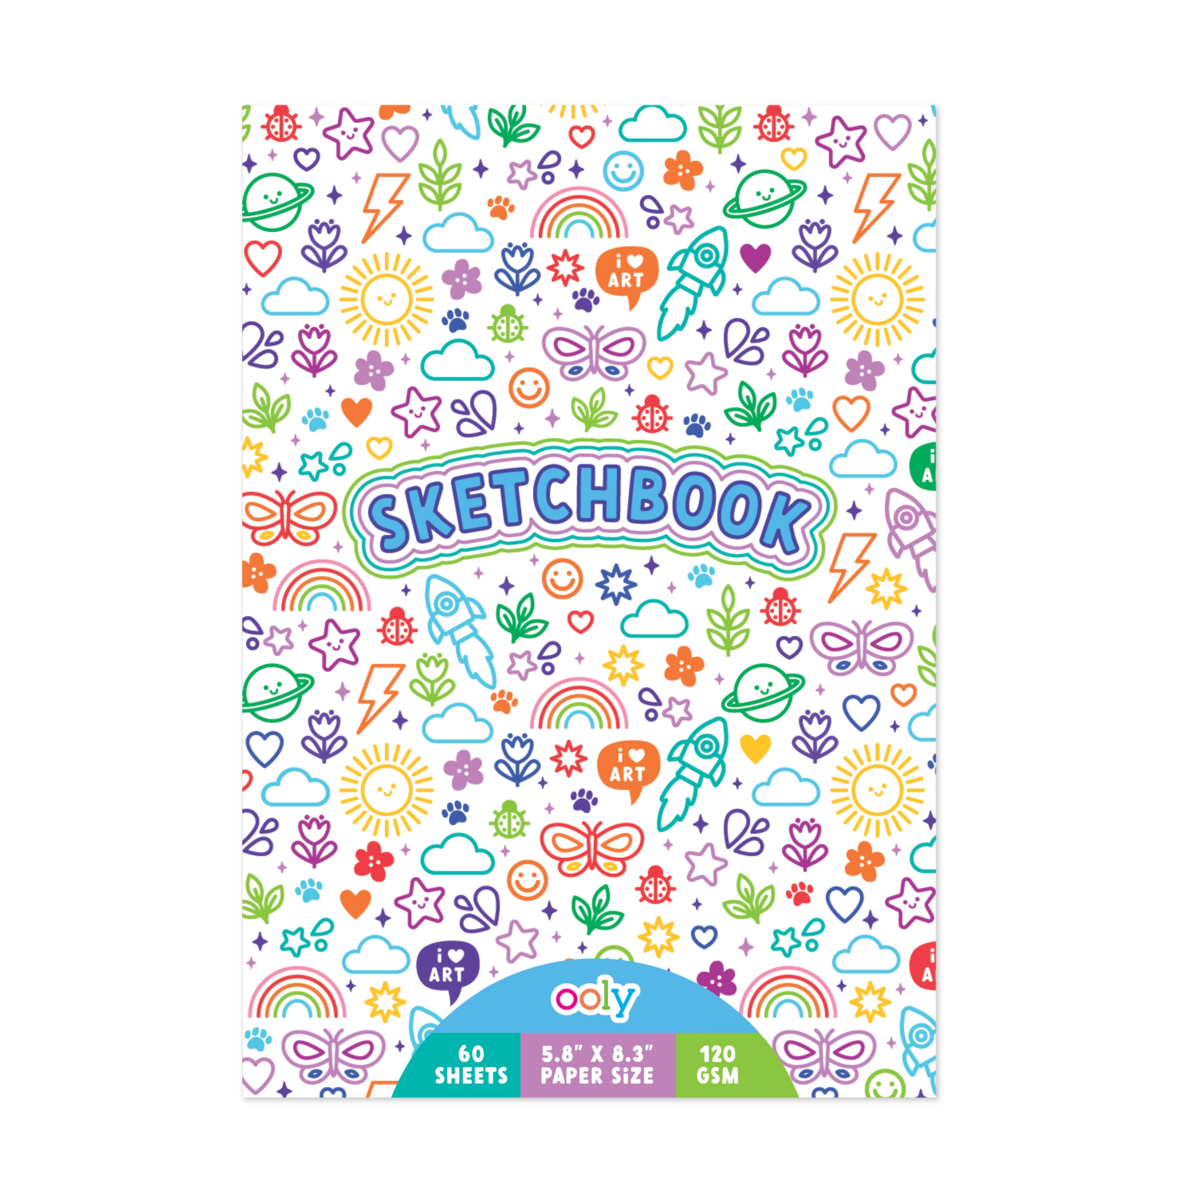  OOLY Chunkies 12 x 9 Thick Paper Sketchbook Pad [Pack of 1] -  60 Pages per Pad, 120 GSM Paper / 32 LB Paper for Drawing, Artwork, Perfect  with Chunkies Paint